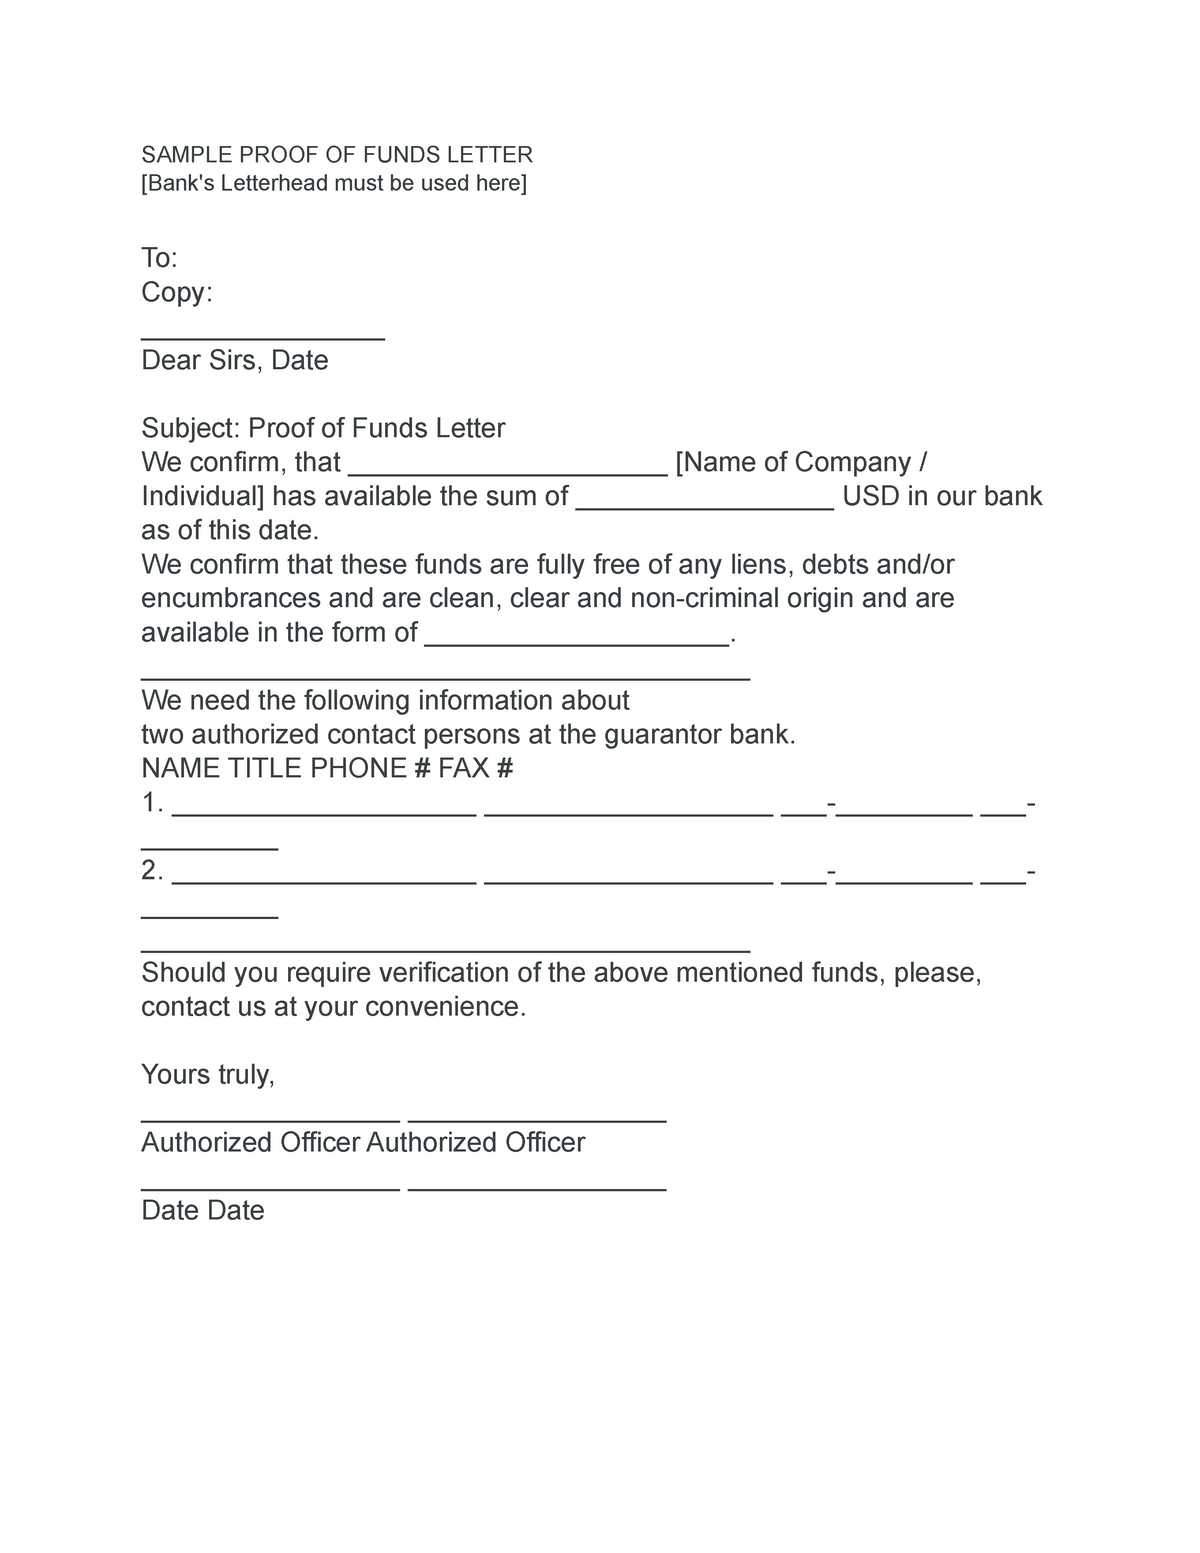 practice: Proof of funds letter template 03 SAMPLE PROOF OF FUNDS